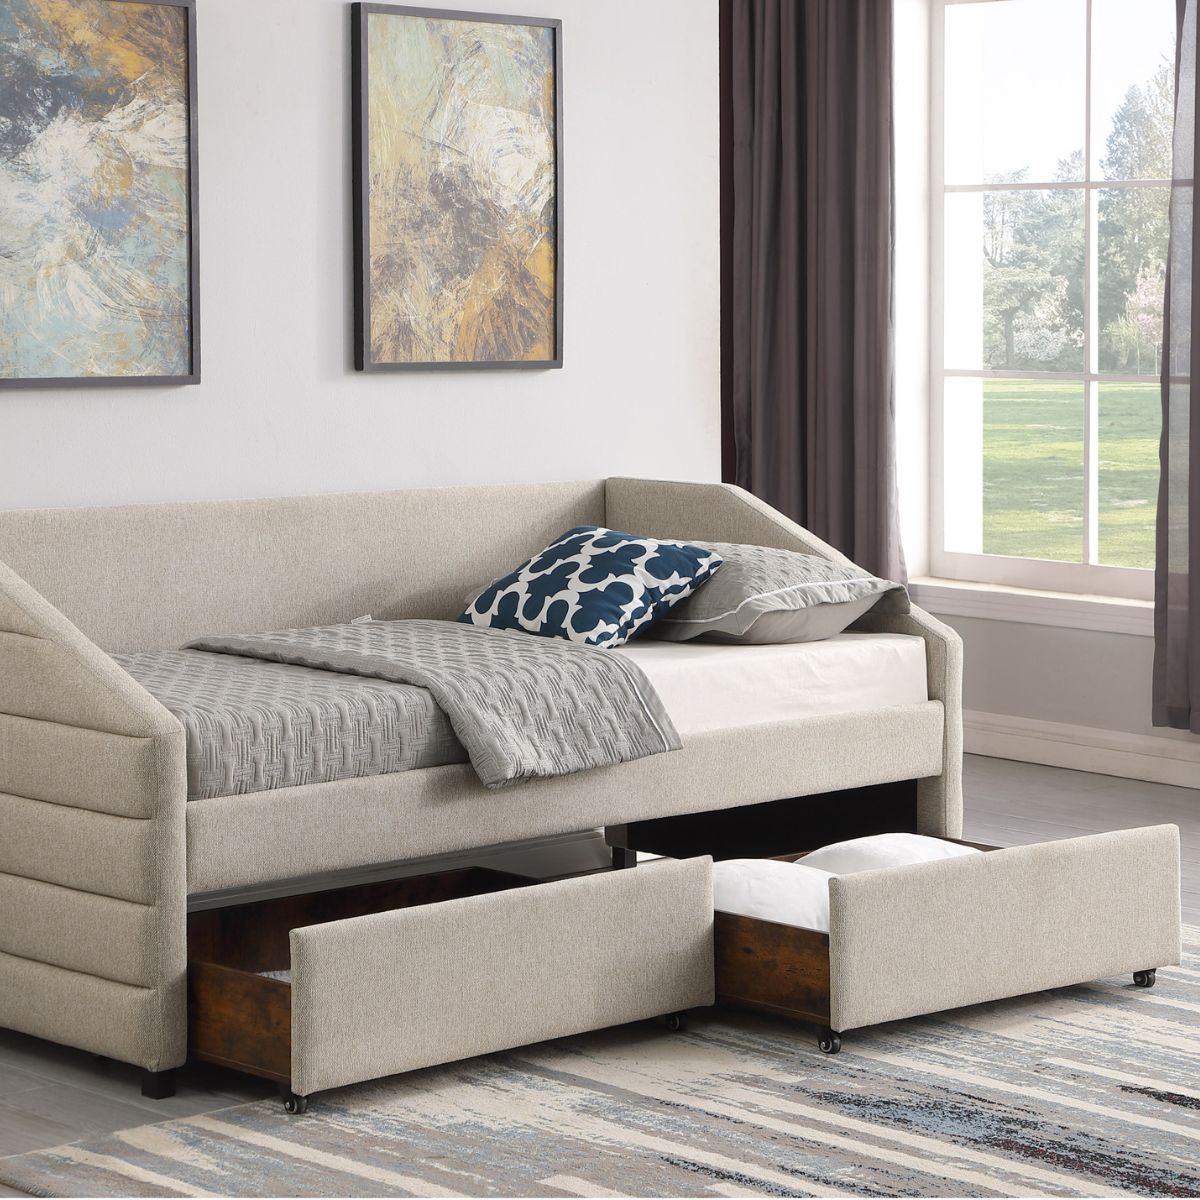 Baku Upholstered Day Bed with Storage Beige - 3